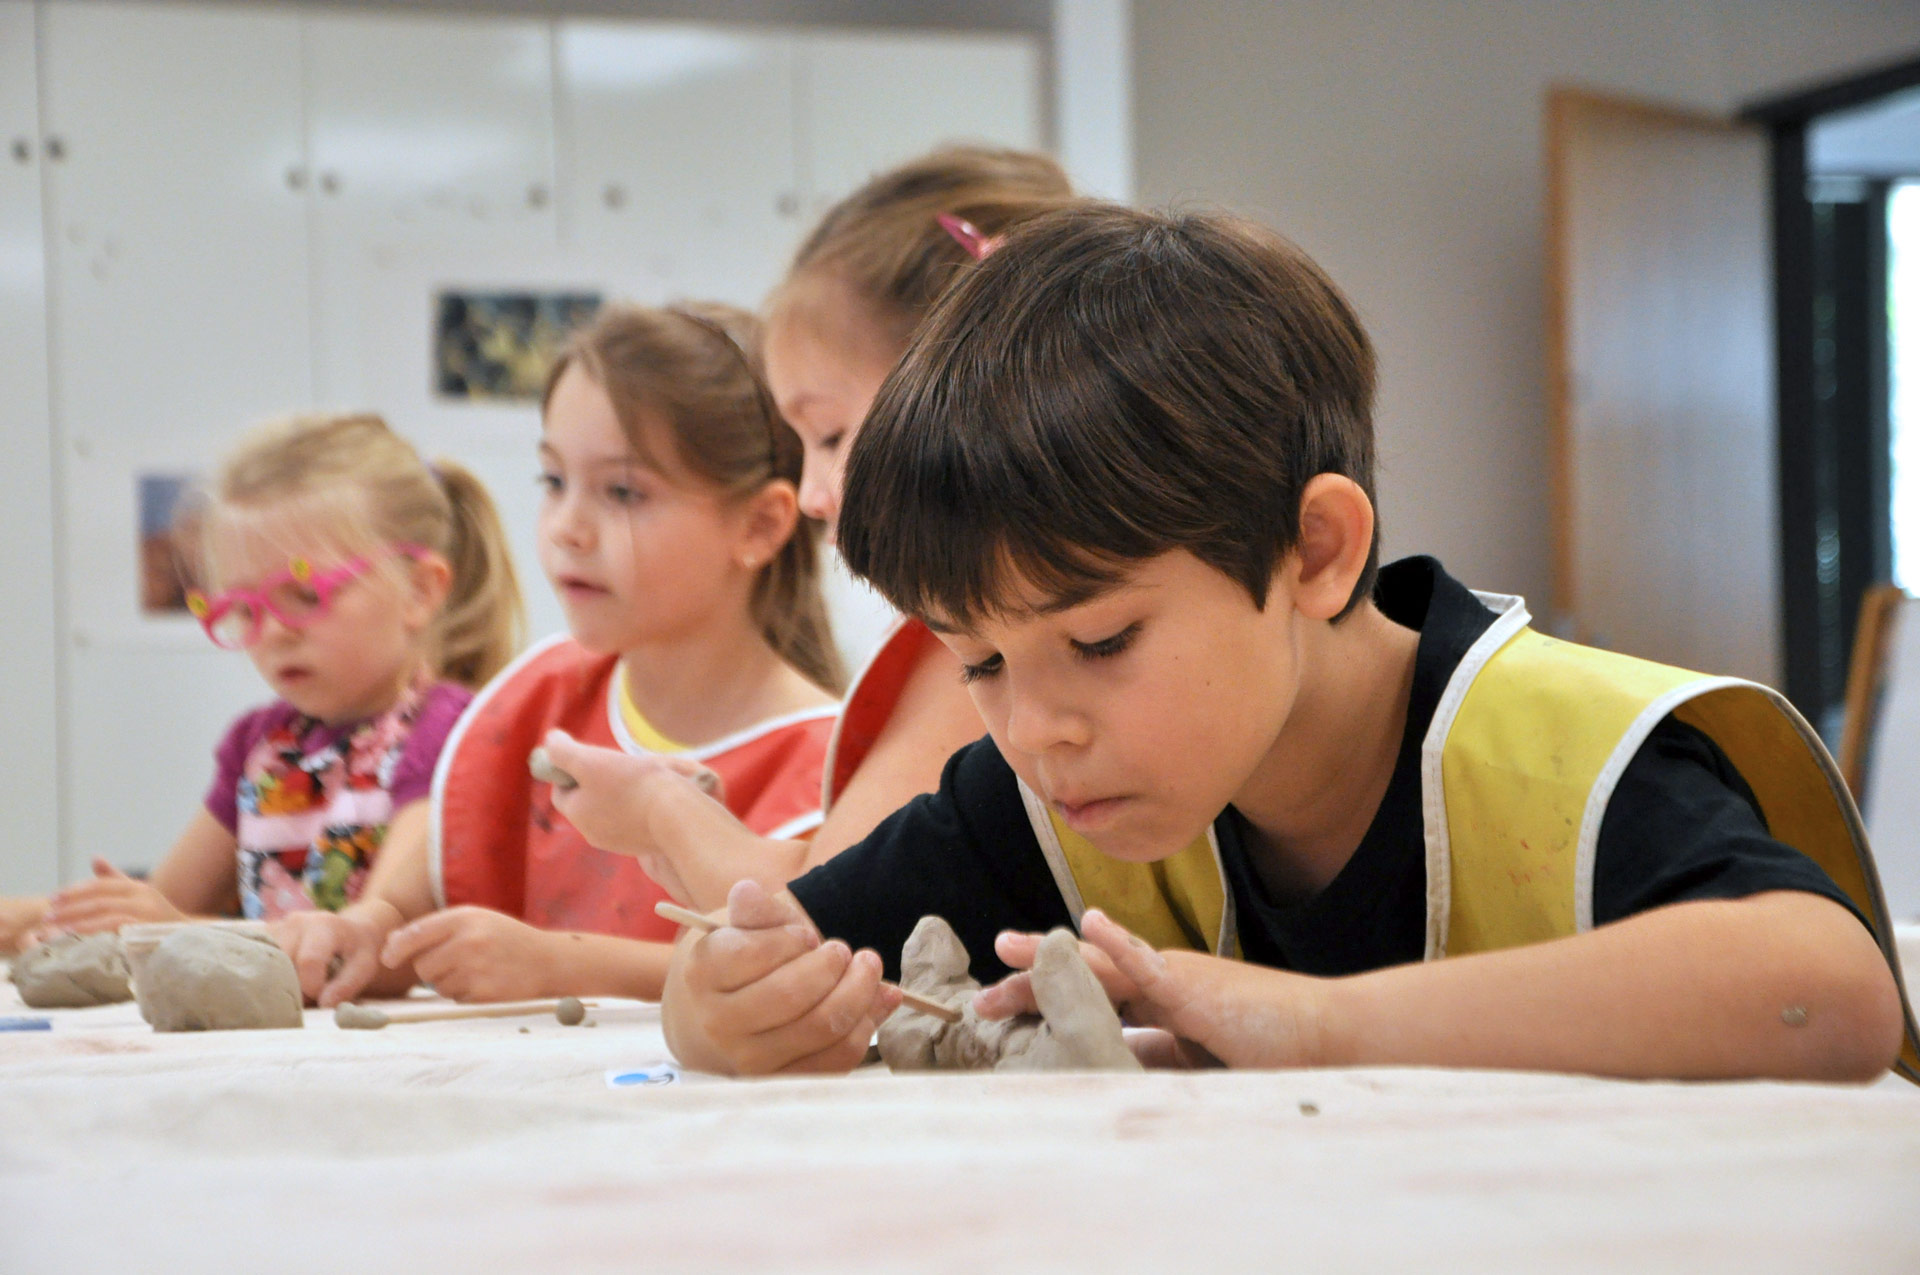 UHCL Family Art Day brings families together with free events, crafts and fun